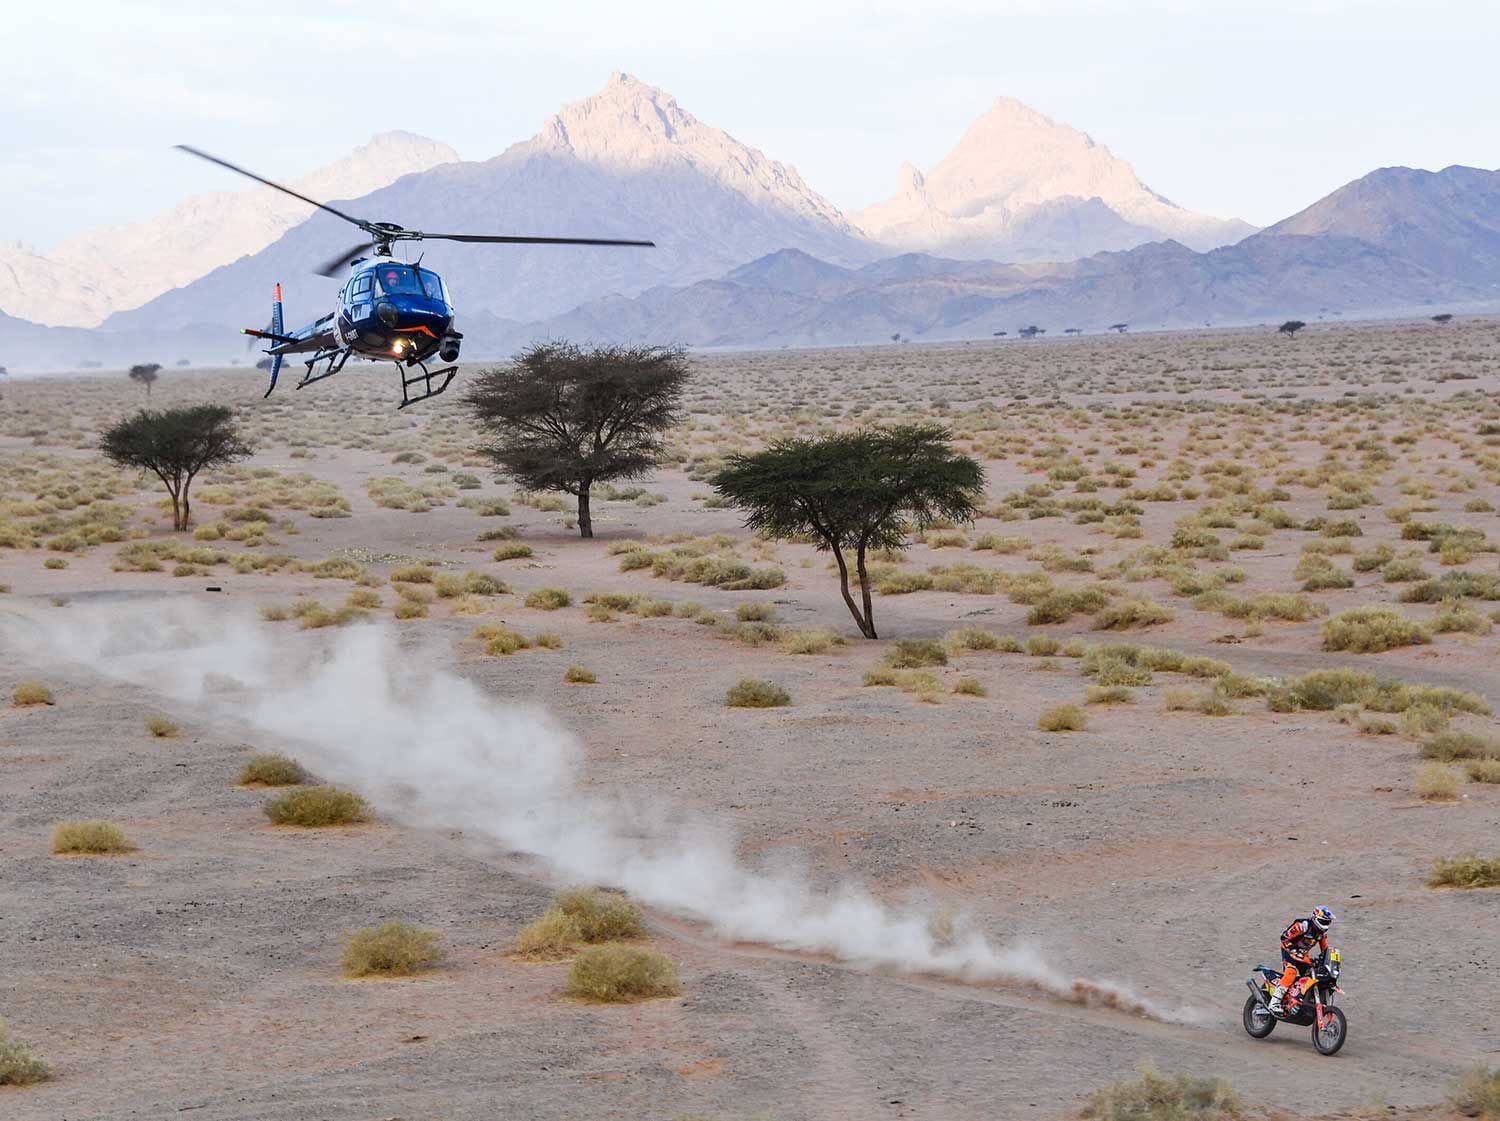 Toby Price aboard the Red Bull KTM Factory bike rides during Stage 11 of the Dakar Rally, navigating his way from Shubaytah to Haradh.